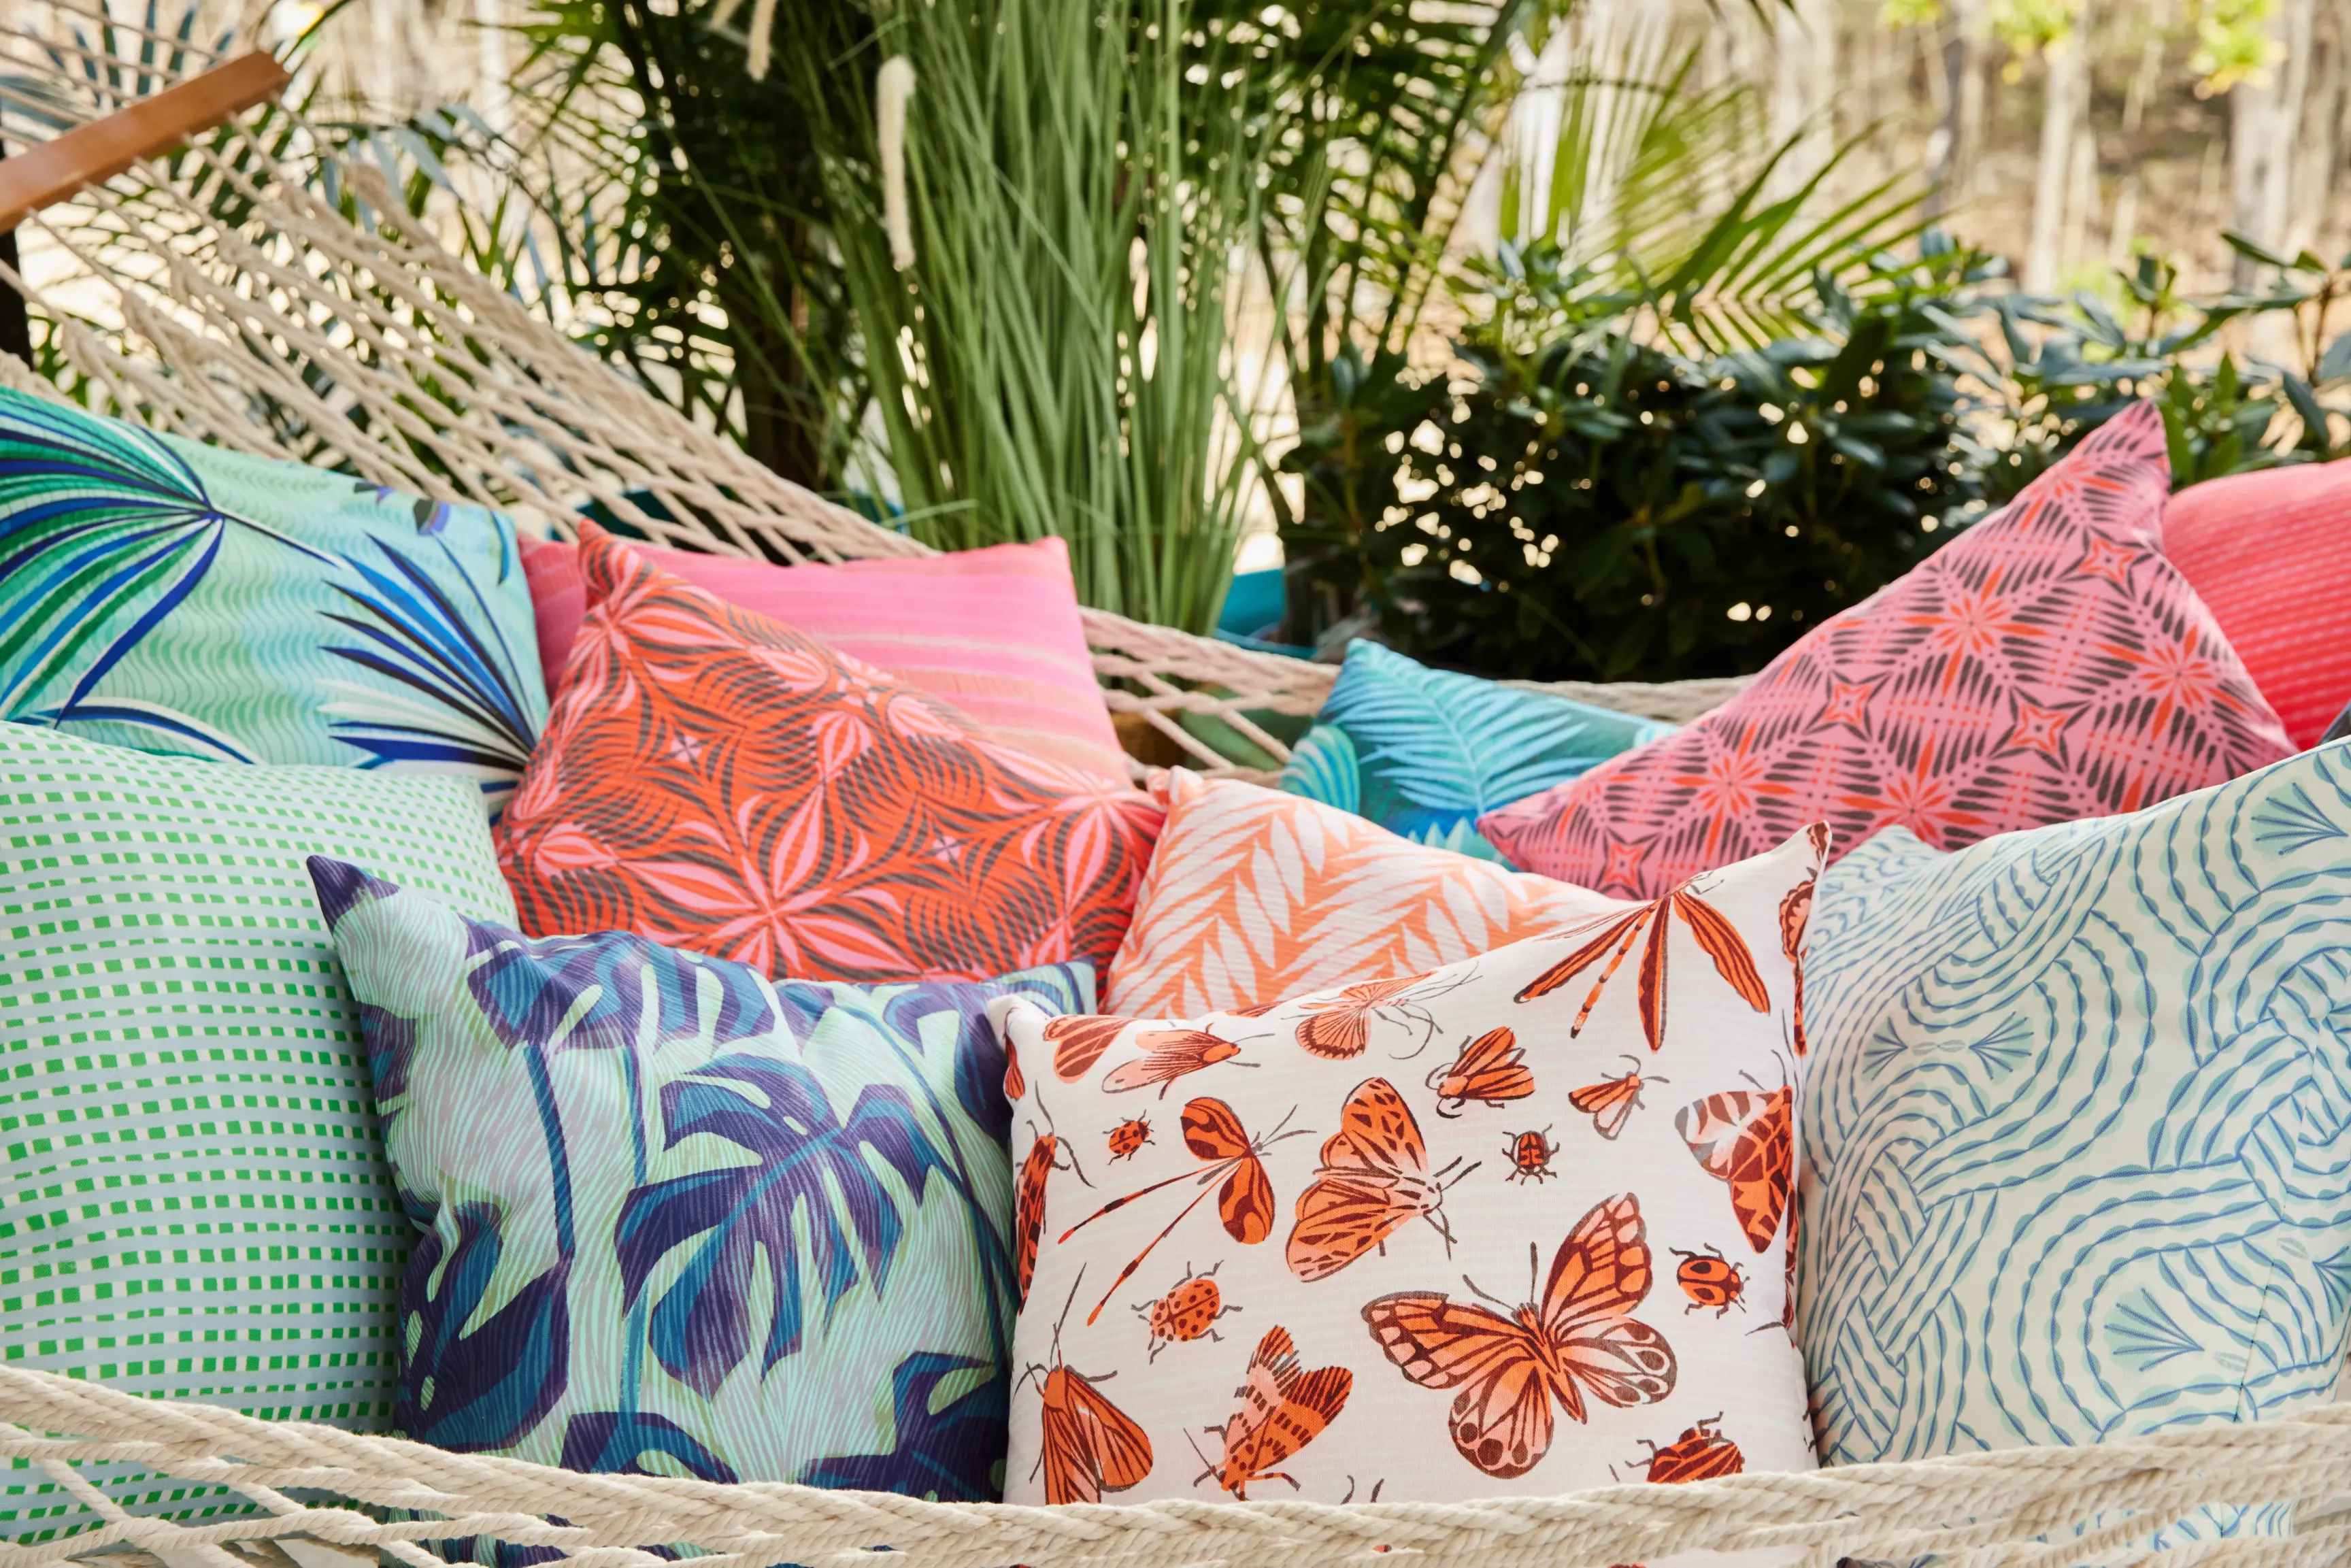 Summery colorful square throw pillows in hammock